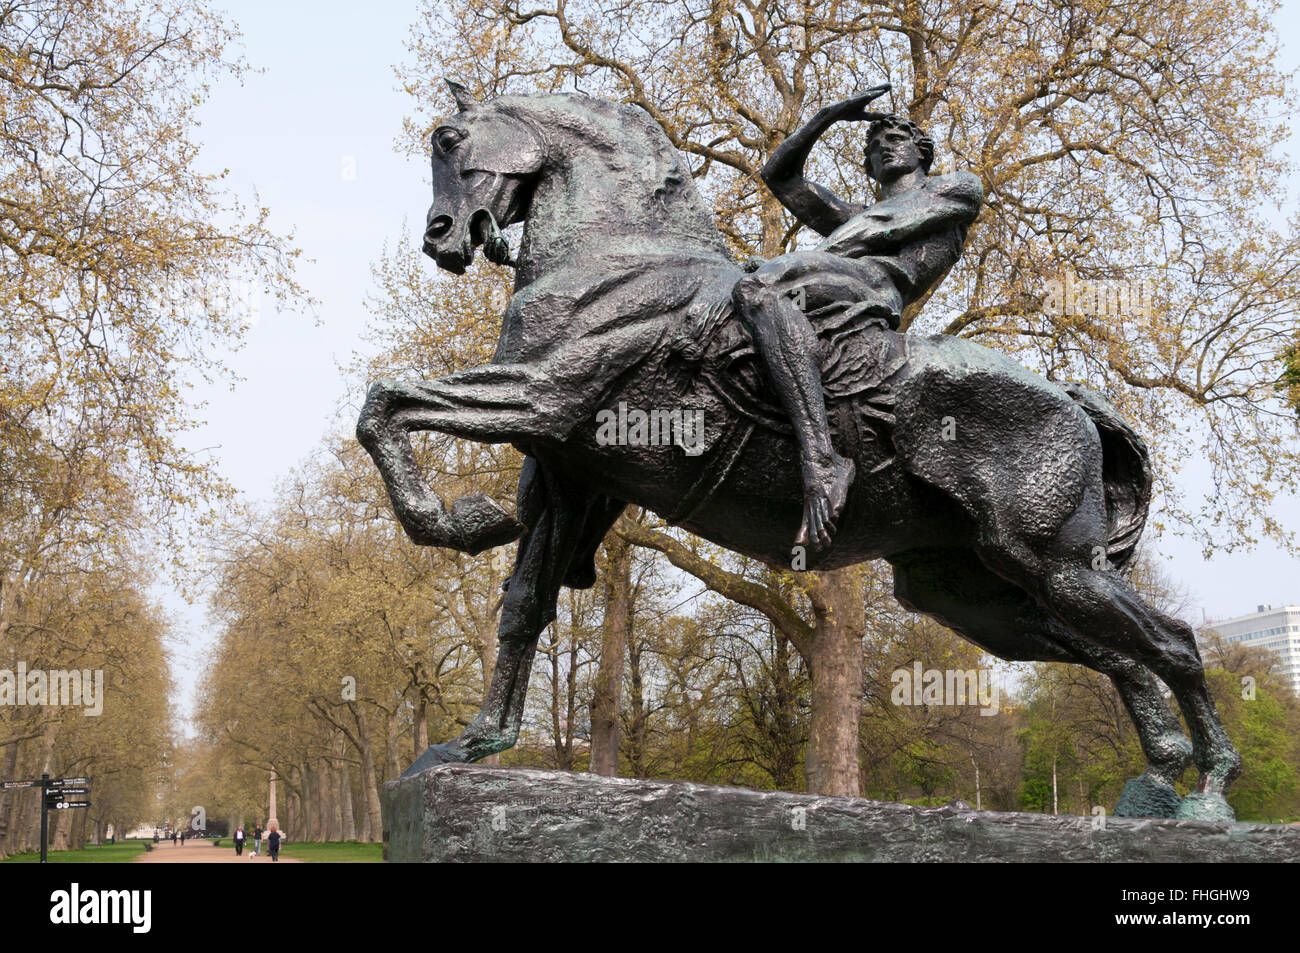 Physical Energy by G F Watts in Kensington Gardens. SEE DETAILS IN DESCRIPTION. Stock Photo